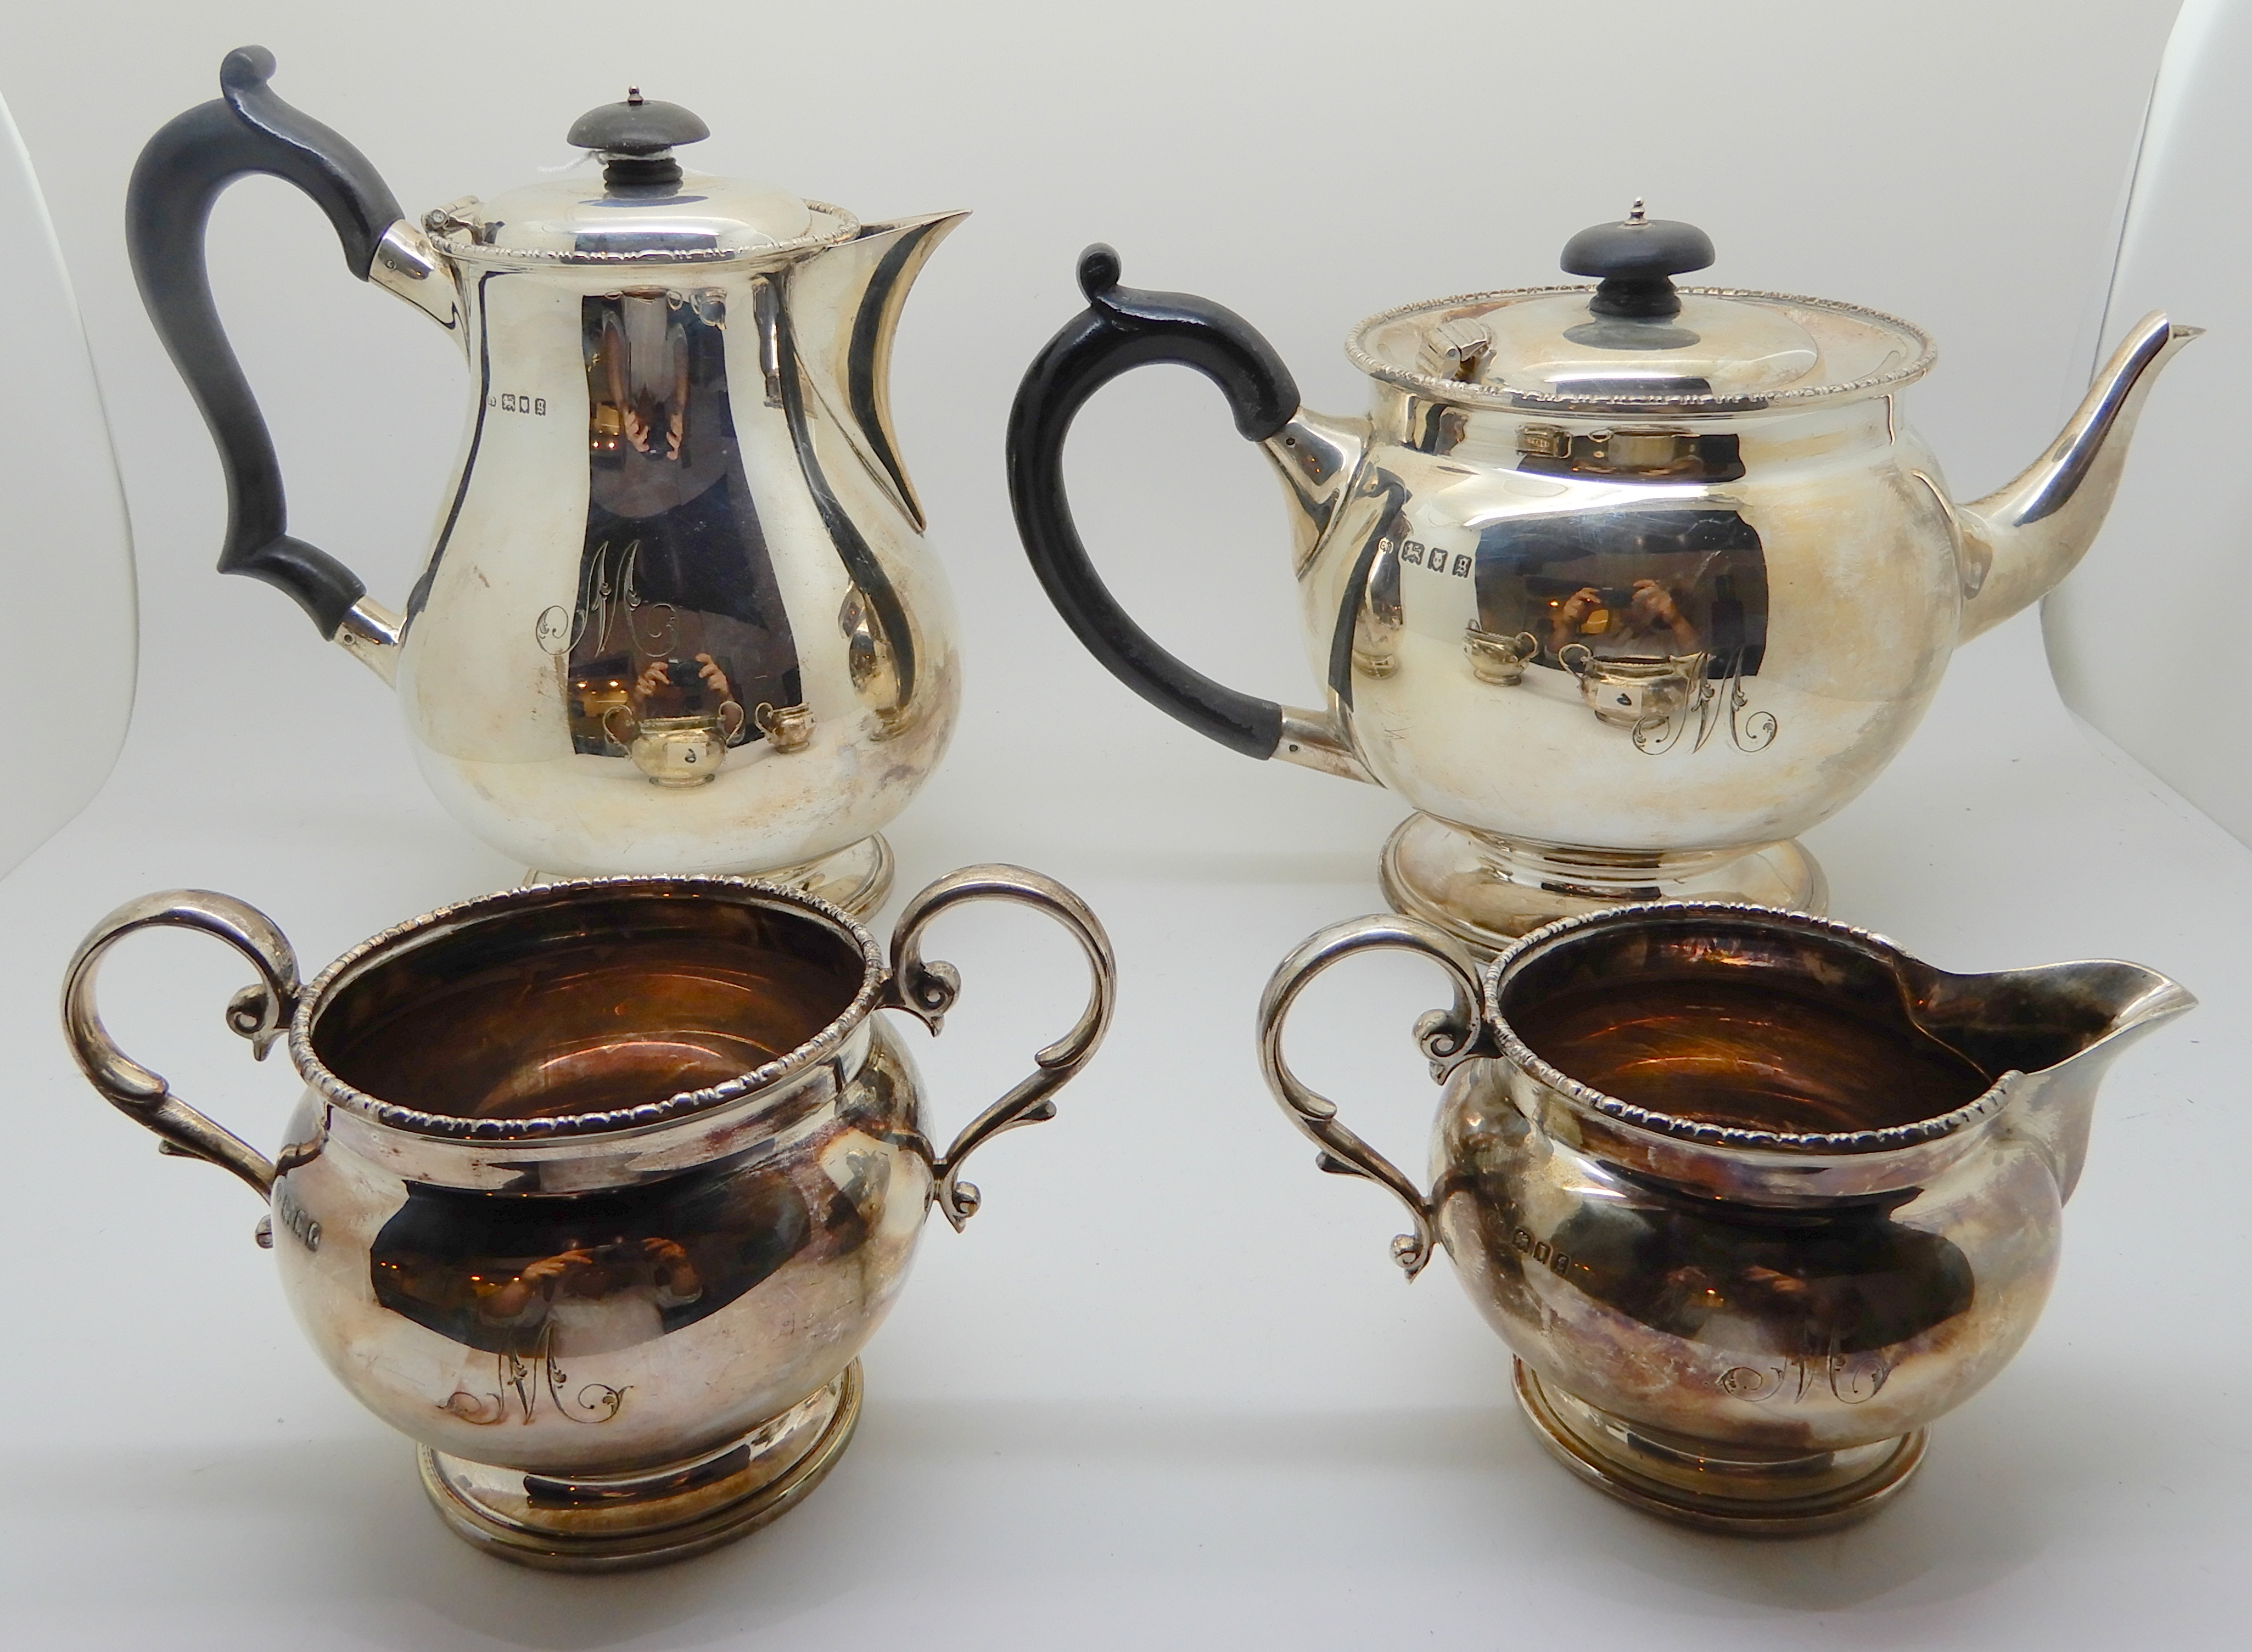 A four-piece silver tea service, London 1902, of baluster shape with gadrooned borders, each piece